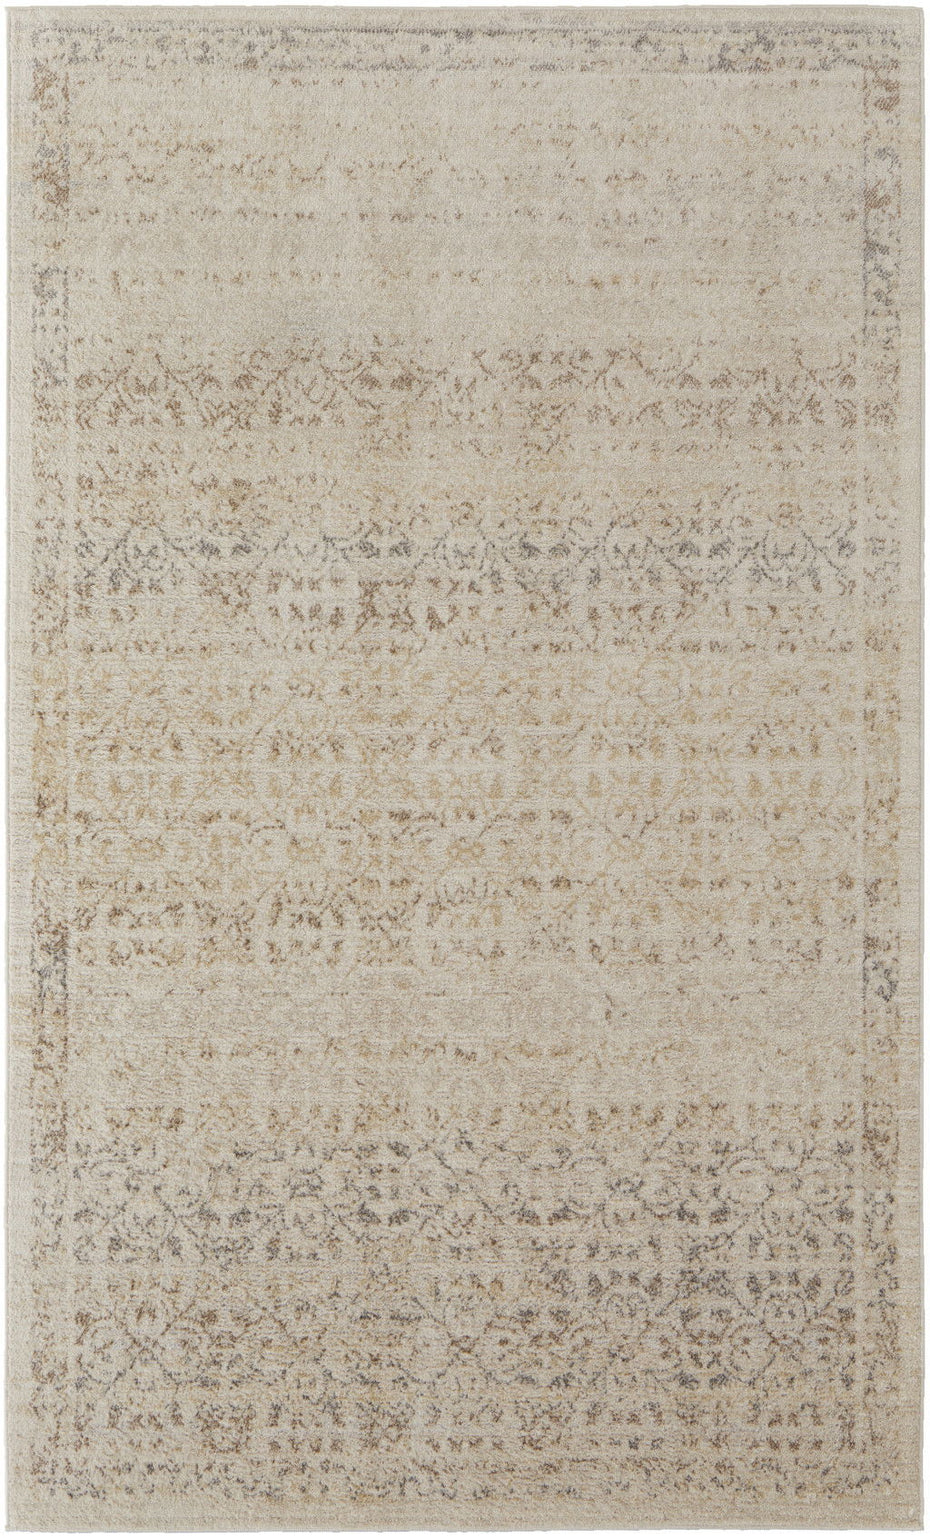 Abstract Power Loom Distressed Area Rug - Ivory Tan And Gray - 8' X 10'